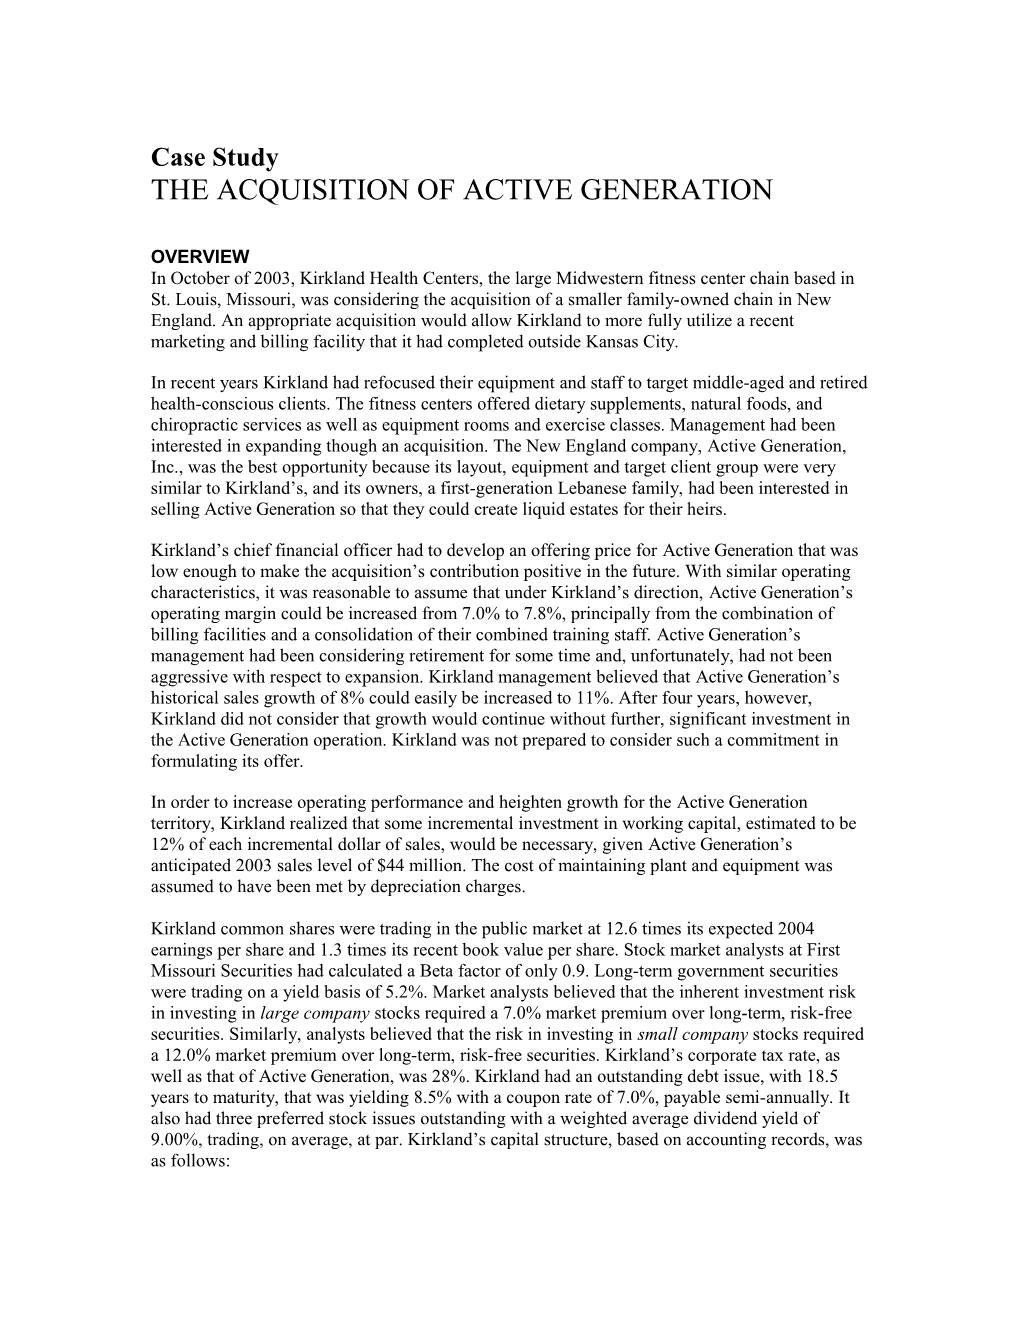 THE Acquisition of ACTIVE GENERATION